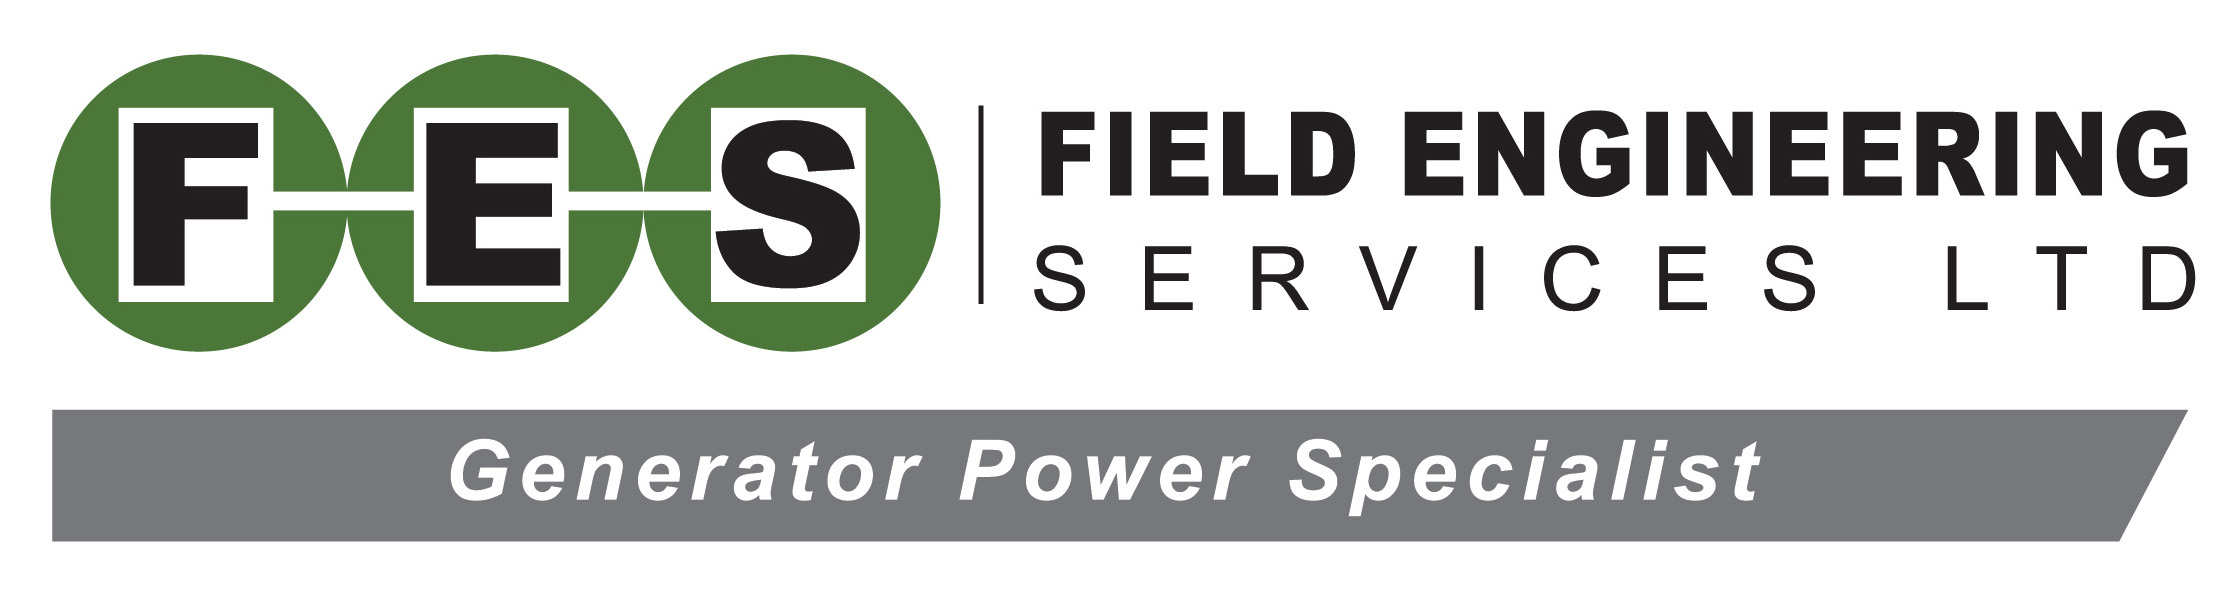 Field Engineering Services